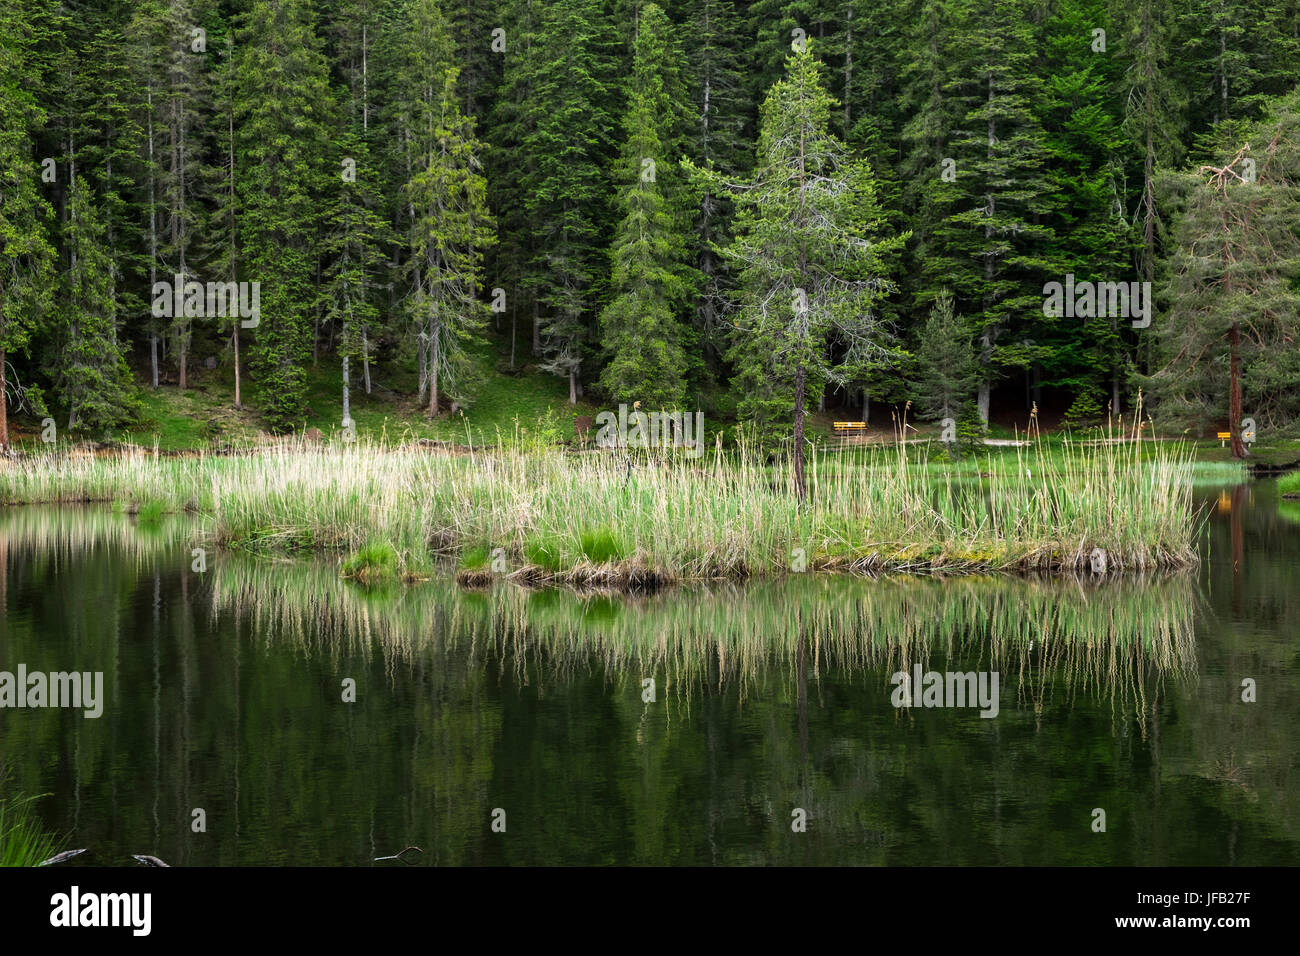 Reflections in the water of the Moserer See, lake, in Mosern, Seefeld, Austria Stock Photo